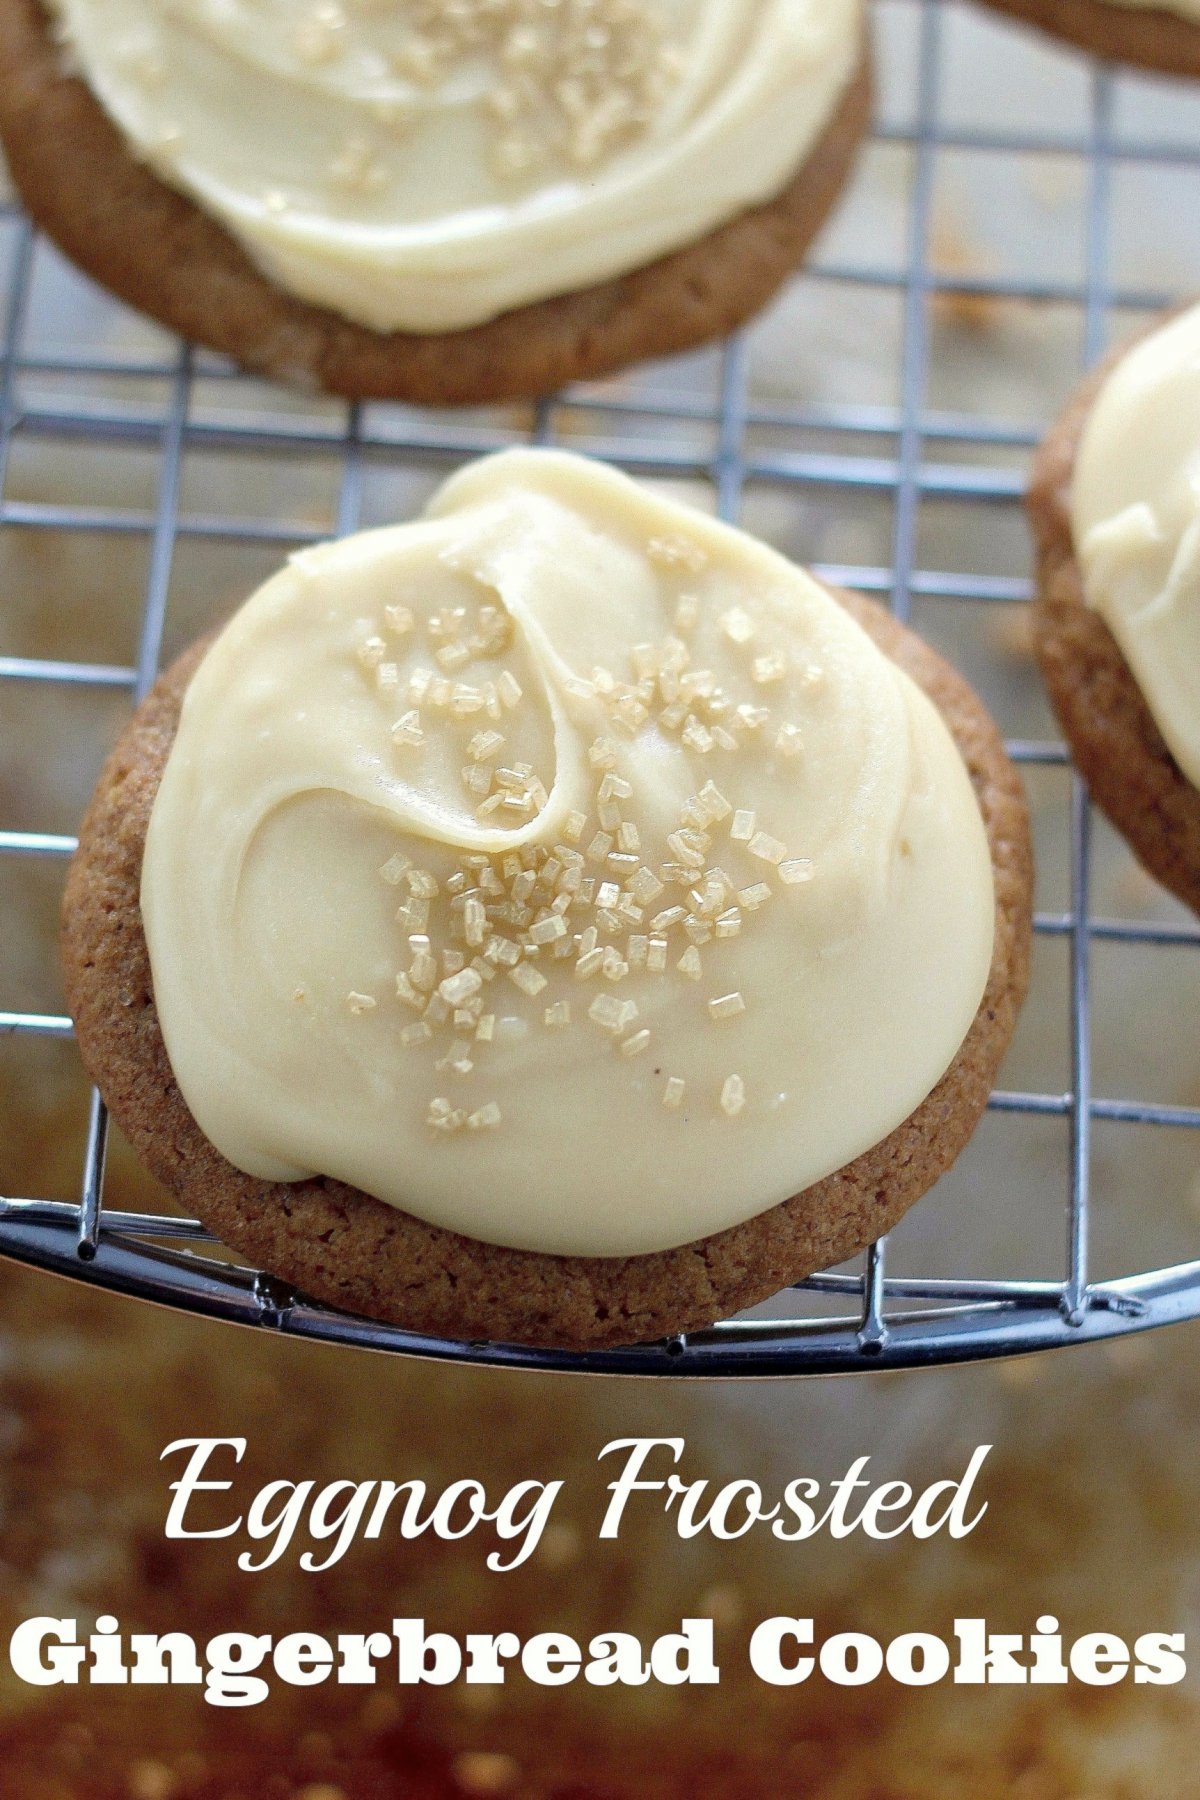 Eggnog Frosted Gingerbread Cookies